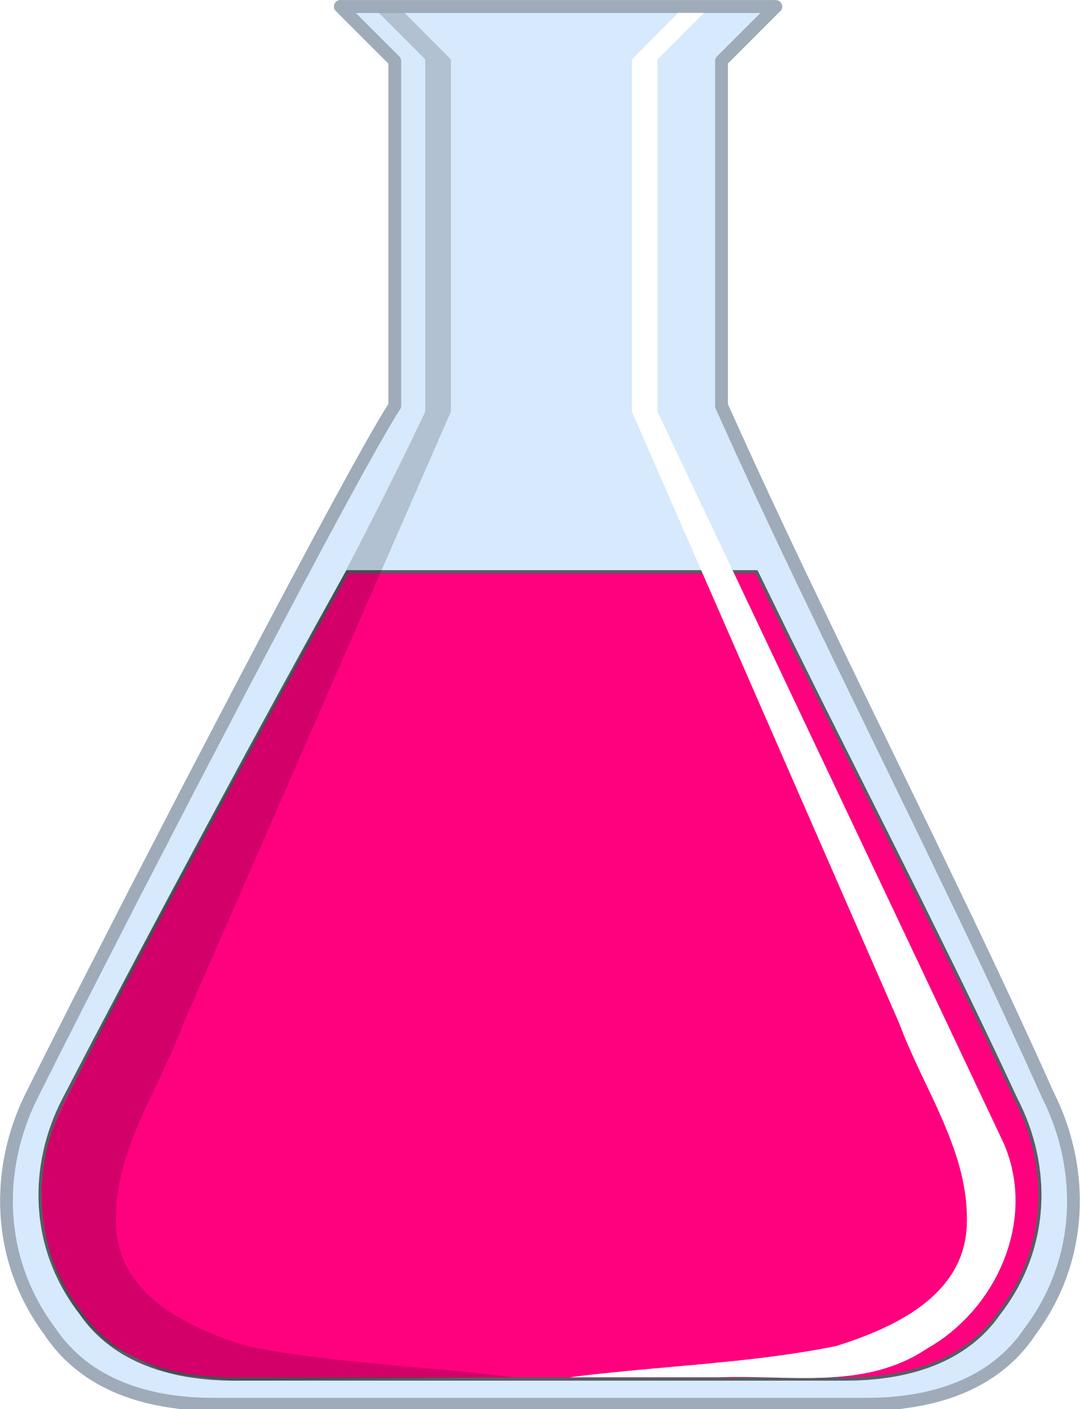 Test Tube Containing Pink Liquid png transparent